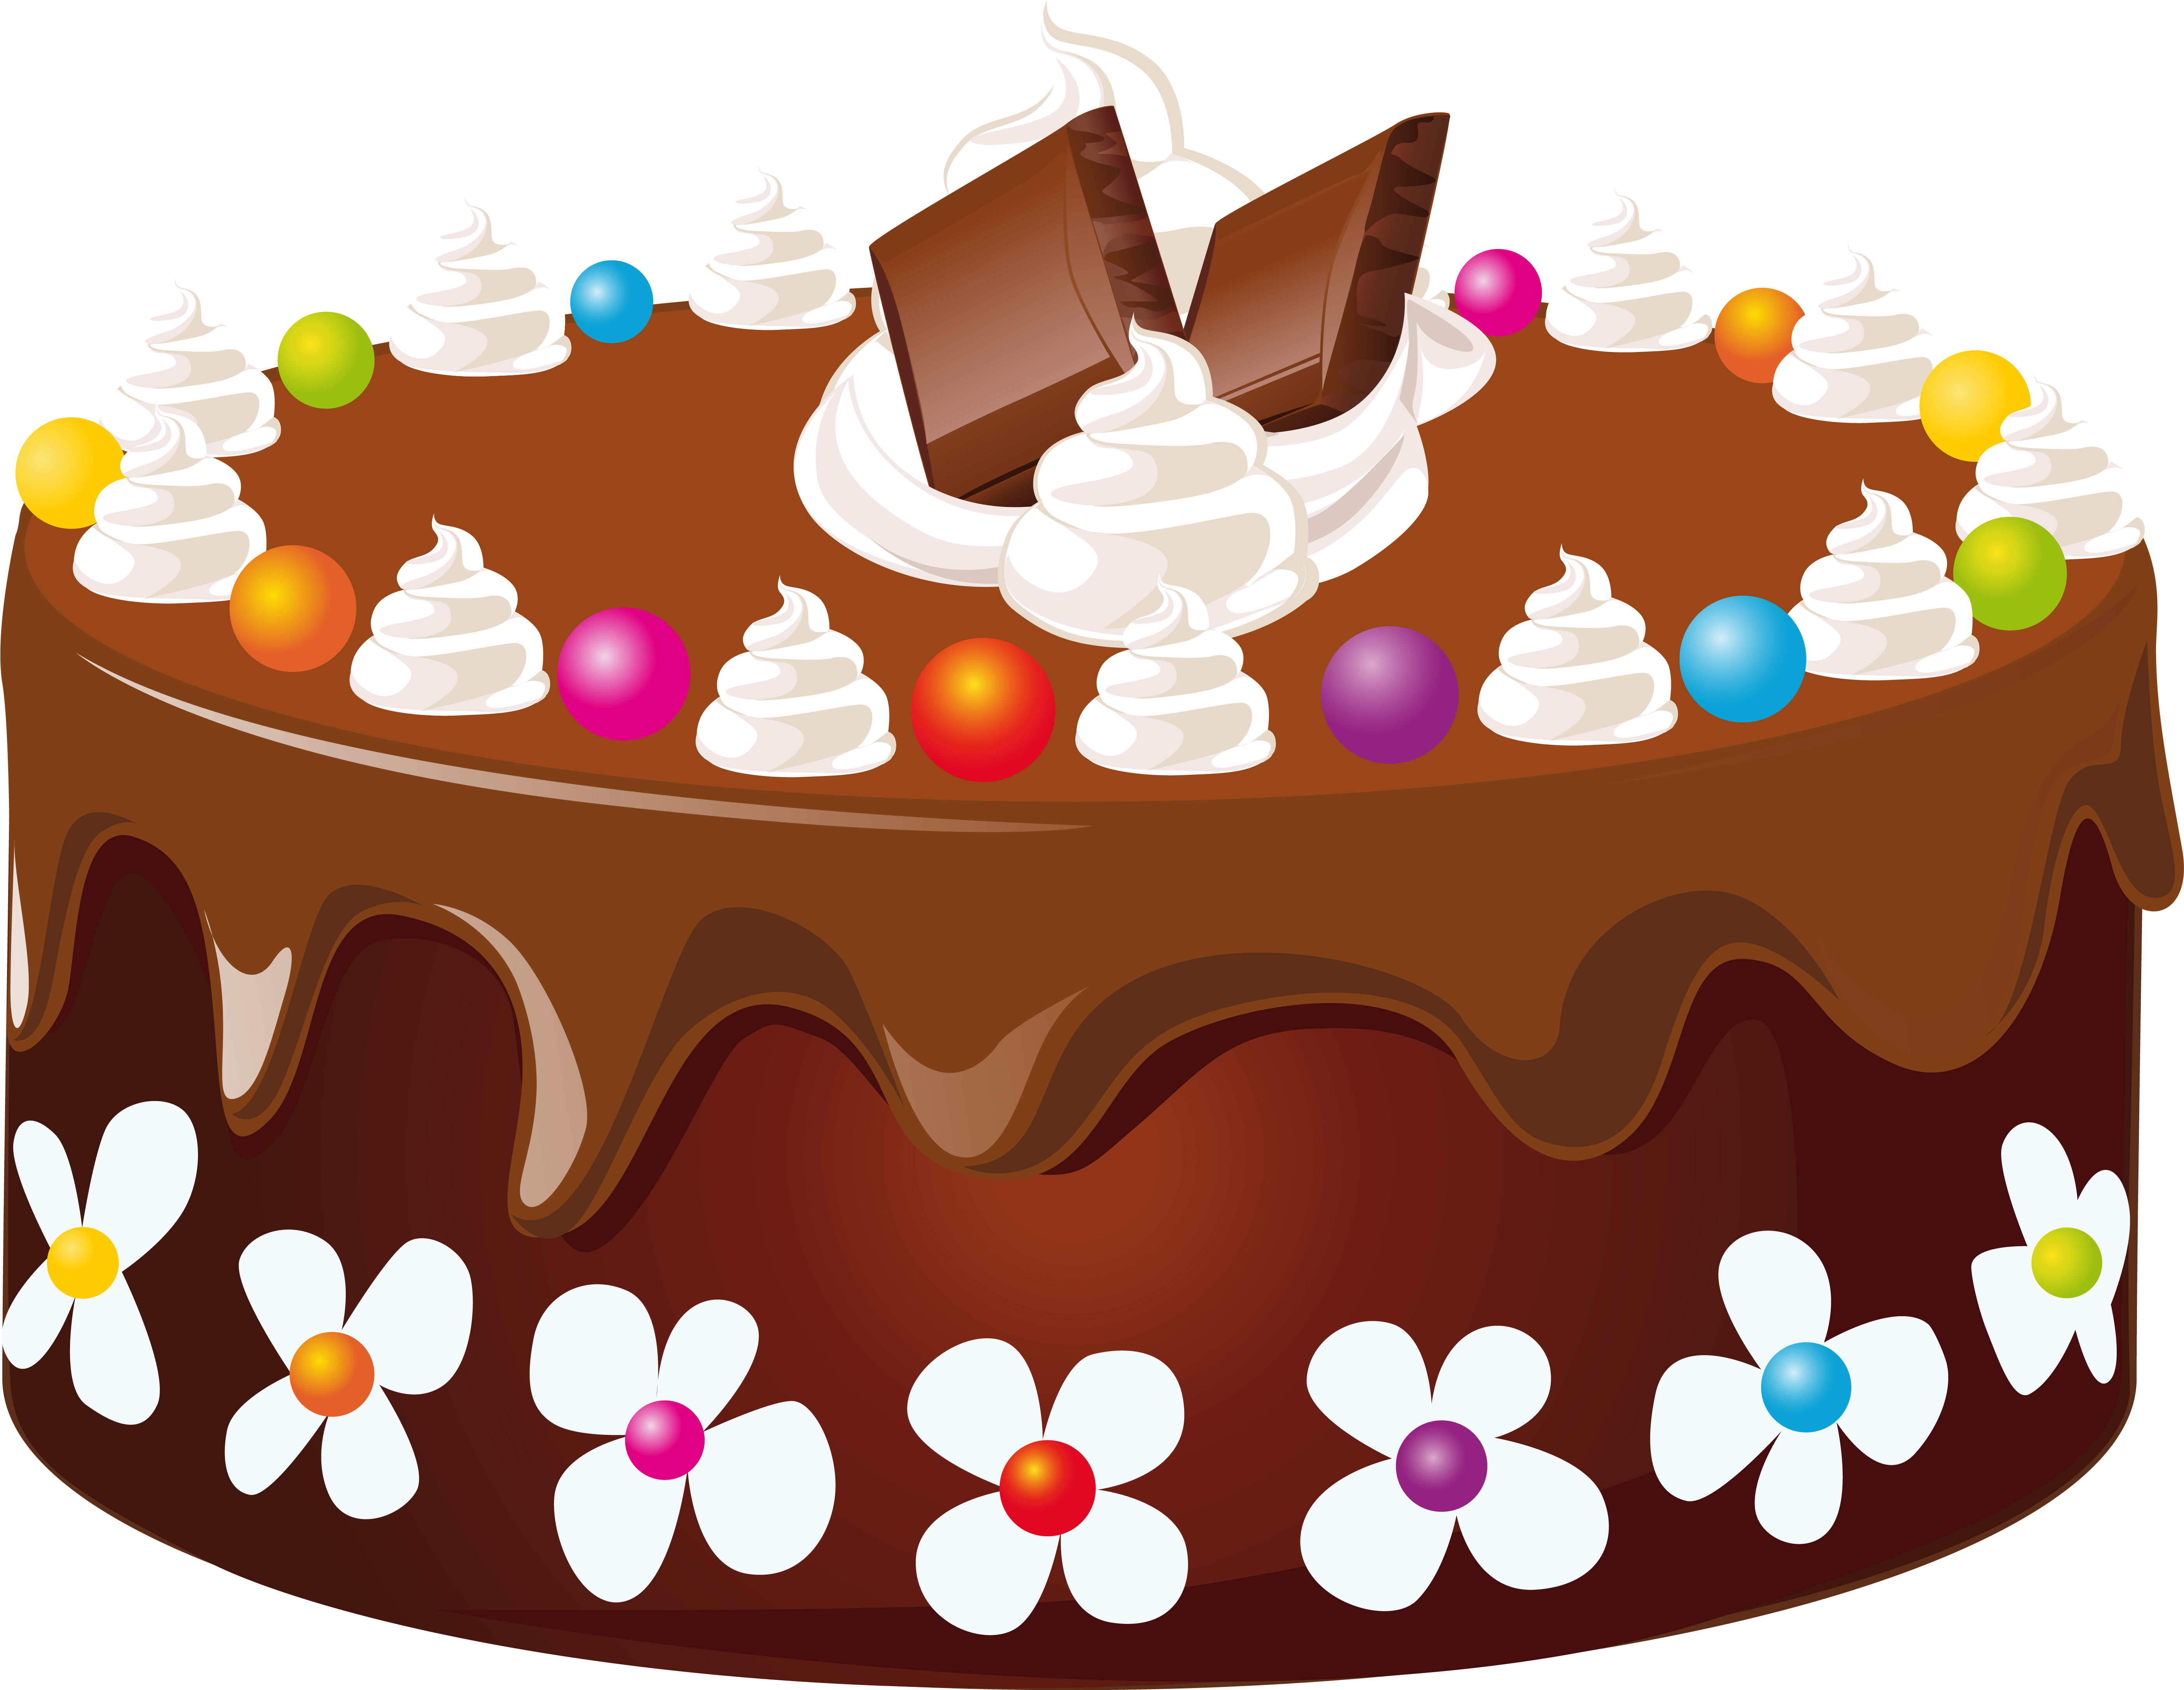 A Chocolate Cake With White Frosting And Flowers